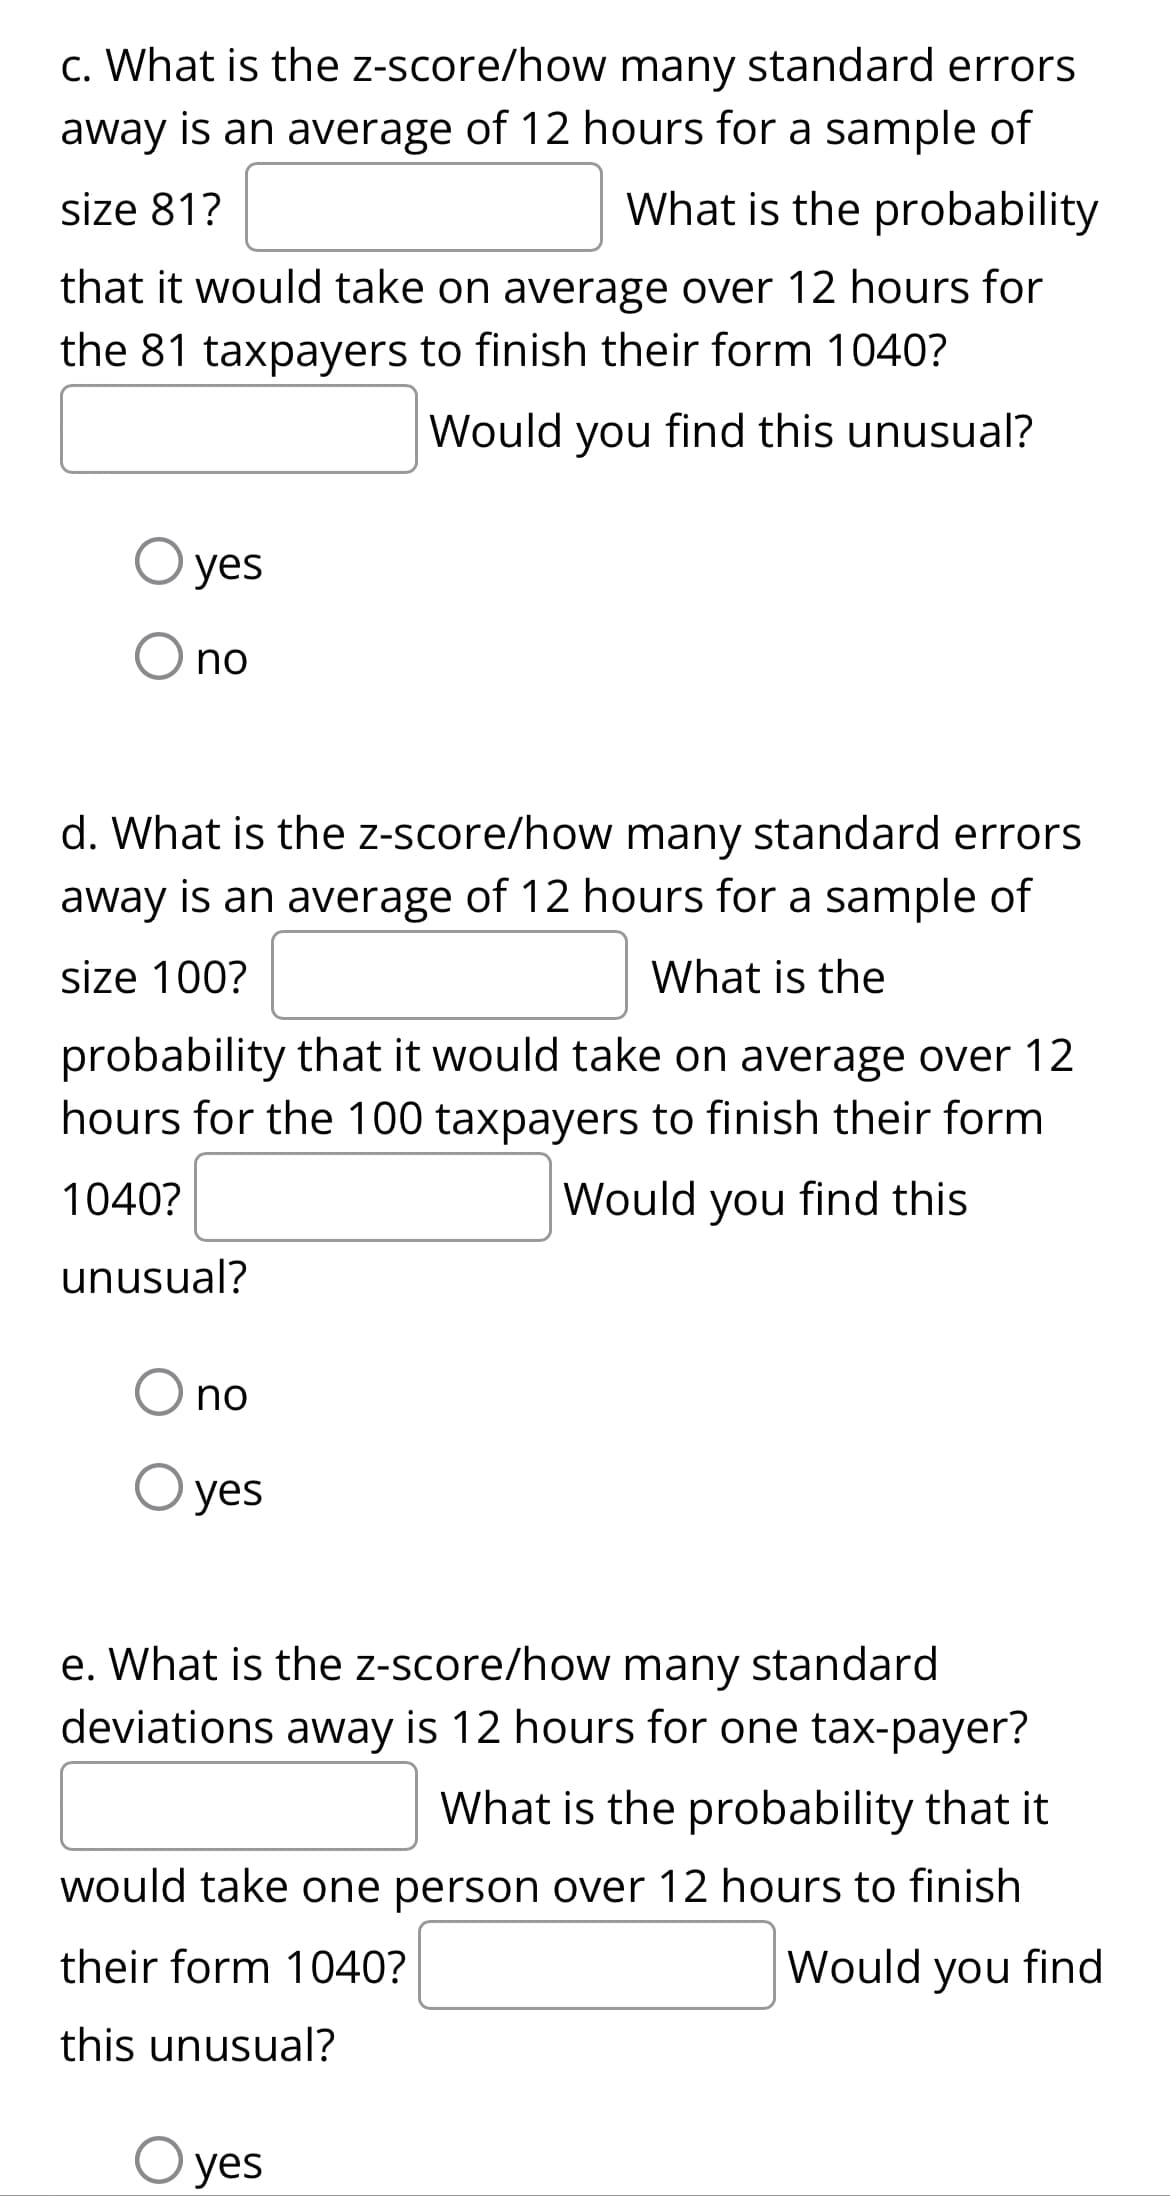 c. What is the z-score/how many standard errors
away is an average of 12 hours for a sample of
size 81?
What is the probability
that it would take on average over 12 hours for
the 81 taxpayers to finish their form 1040?
Would you find this unusual?
O yes
no
d. What is the z-score/how many standard errors
away is an average of 12 hours for a sample of
size 100?
What is the
probability that it would take on average over 12
hours for the 100 taxpayers to finish their form
1040?
Would you find this
unusual?
no
O yes
e. What is the z-score/how many standard
deviations away is 12 hours for one tax-payer?
What is the probability that it
would take one person over 12 hours to finish
their form 1040?
Would you find
this unusual?
yes